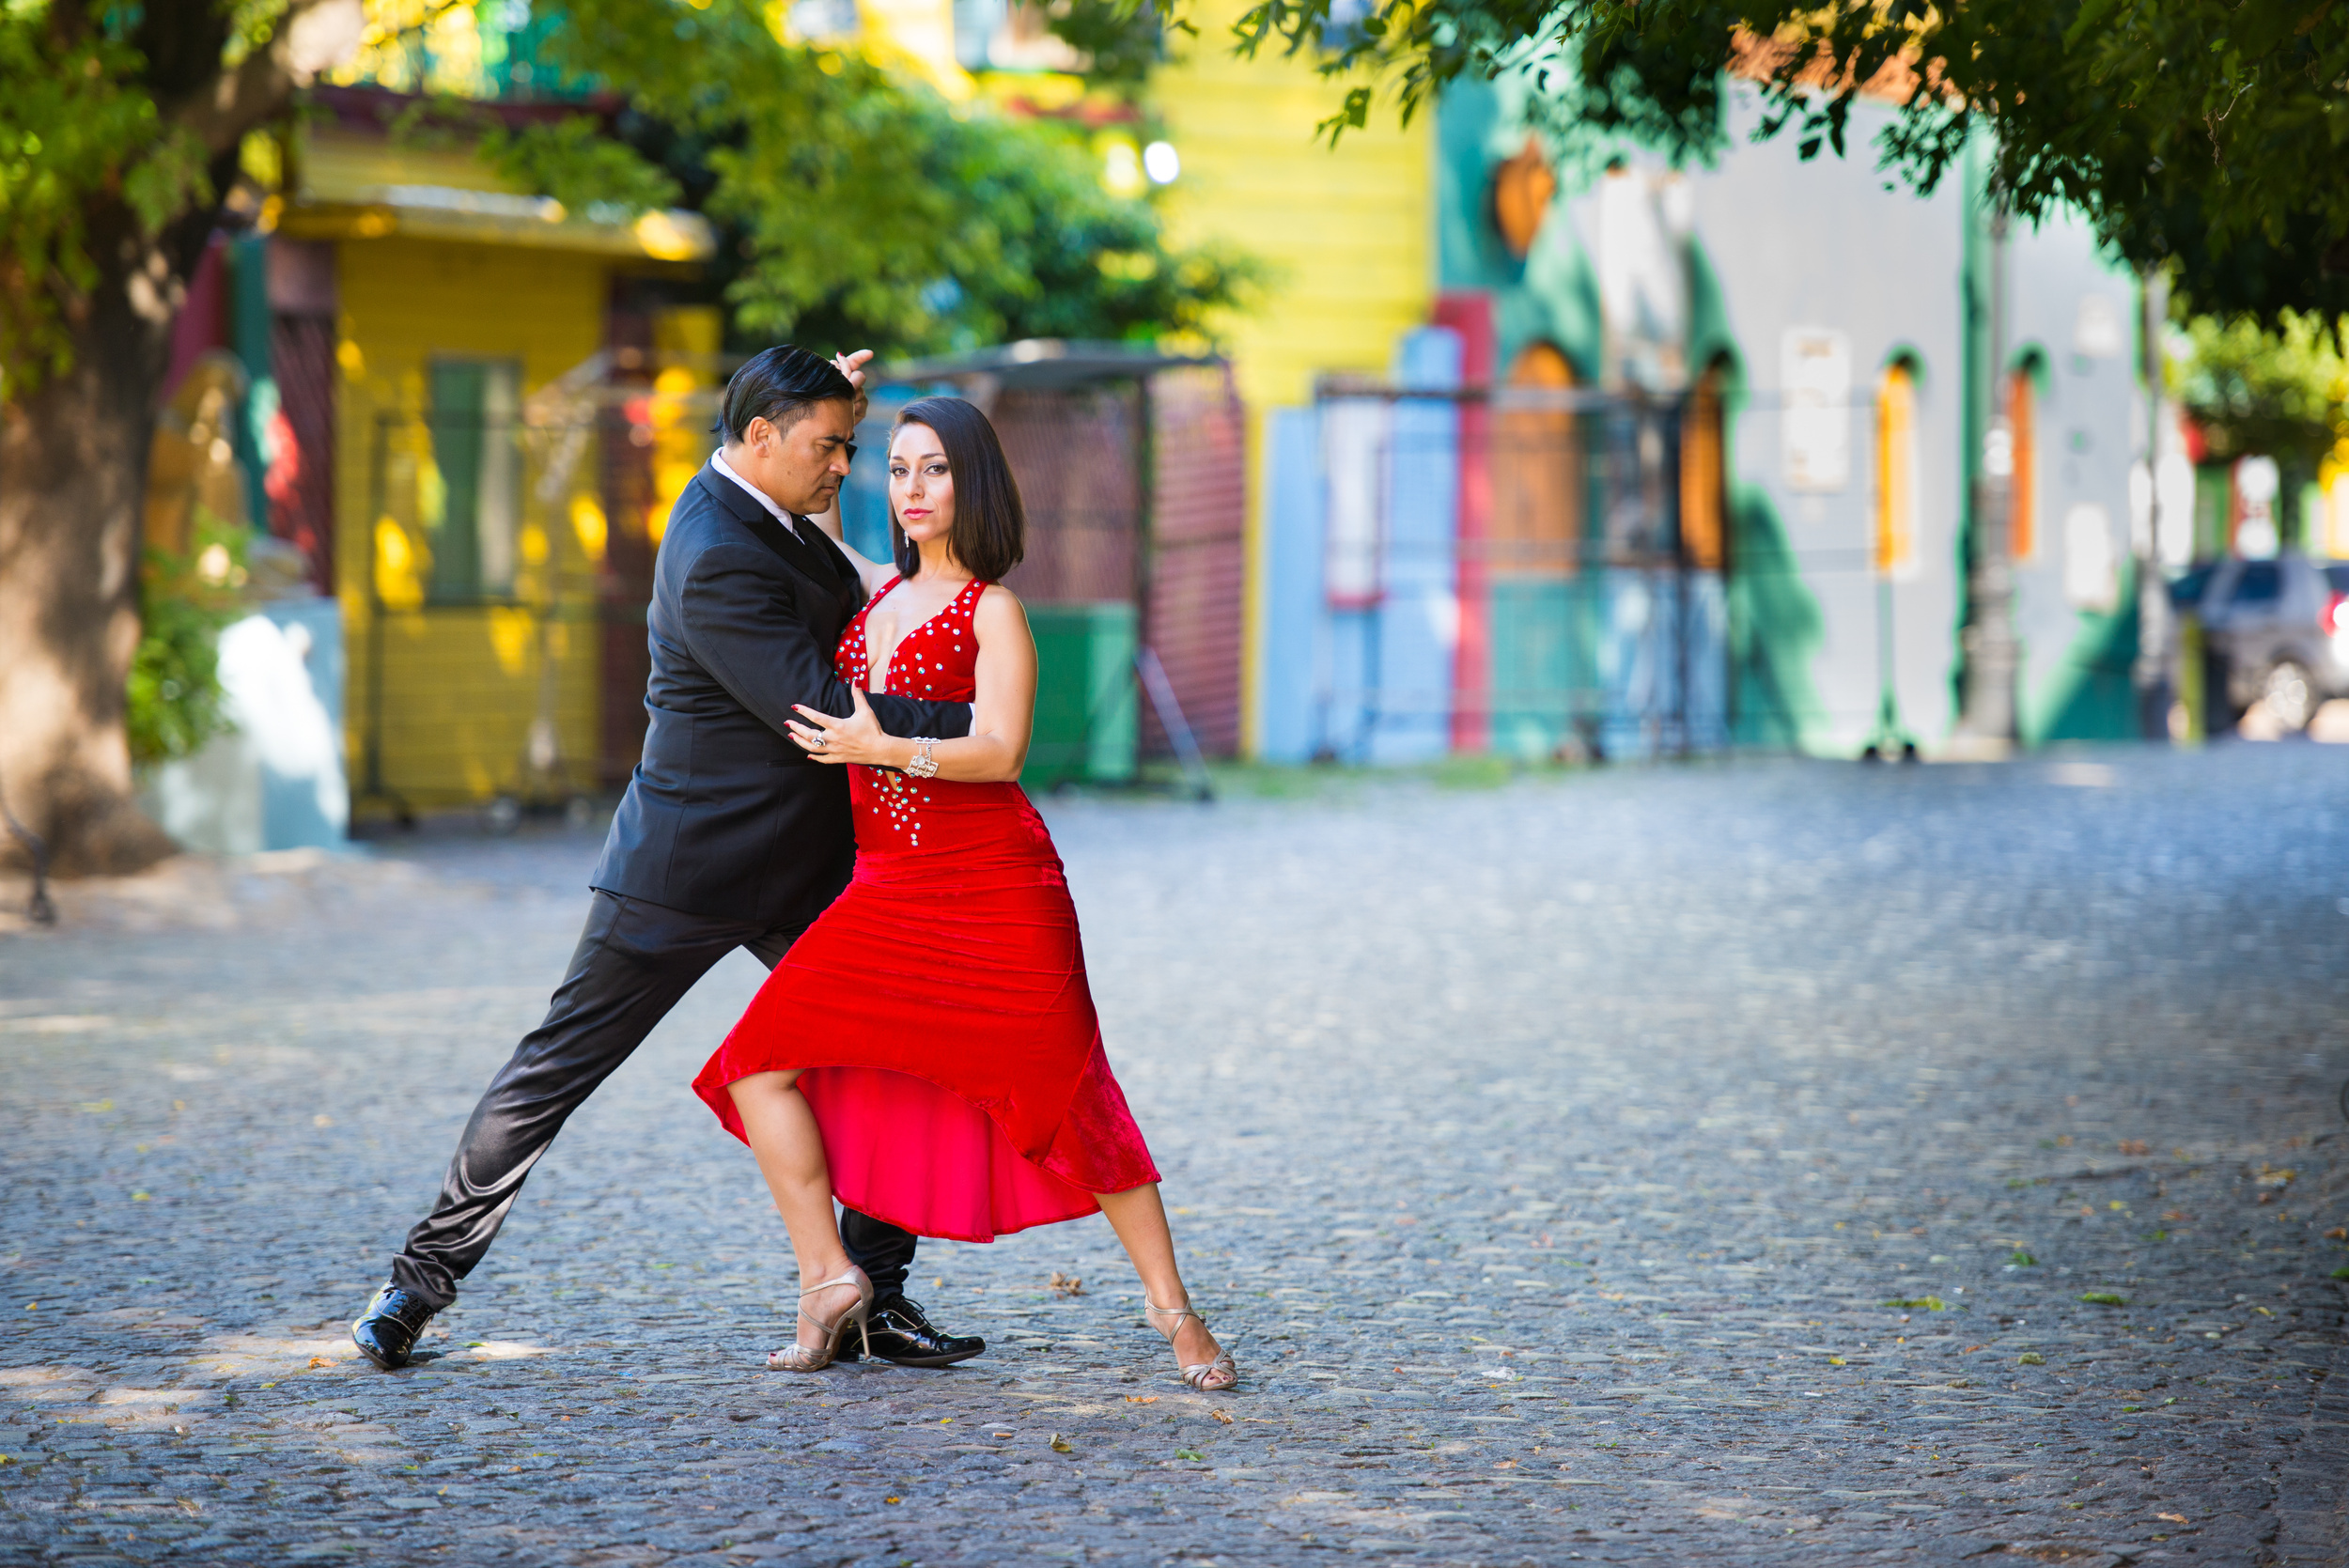 <p>The “Paris of the South” is similarly ideal for couples looking to enjoy a bit of romance on their vacation. Wander the beautiful streets, have a glass (or two) of Argentinian wine at a jazz bar, and maybe try out a tango class. </p><p><a href='https://www.msn.com/en-us/community/channel/vid-cj9pqbr0vn9in2b6ddcd8sfgpfq6x6utp44fssrv6mc2gtybw0us'>Follow us on MSN to see more of our exclusive lifestyle content.</a></p>